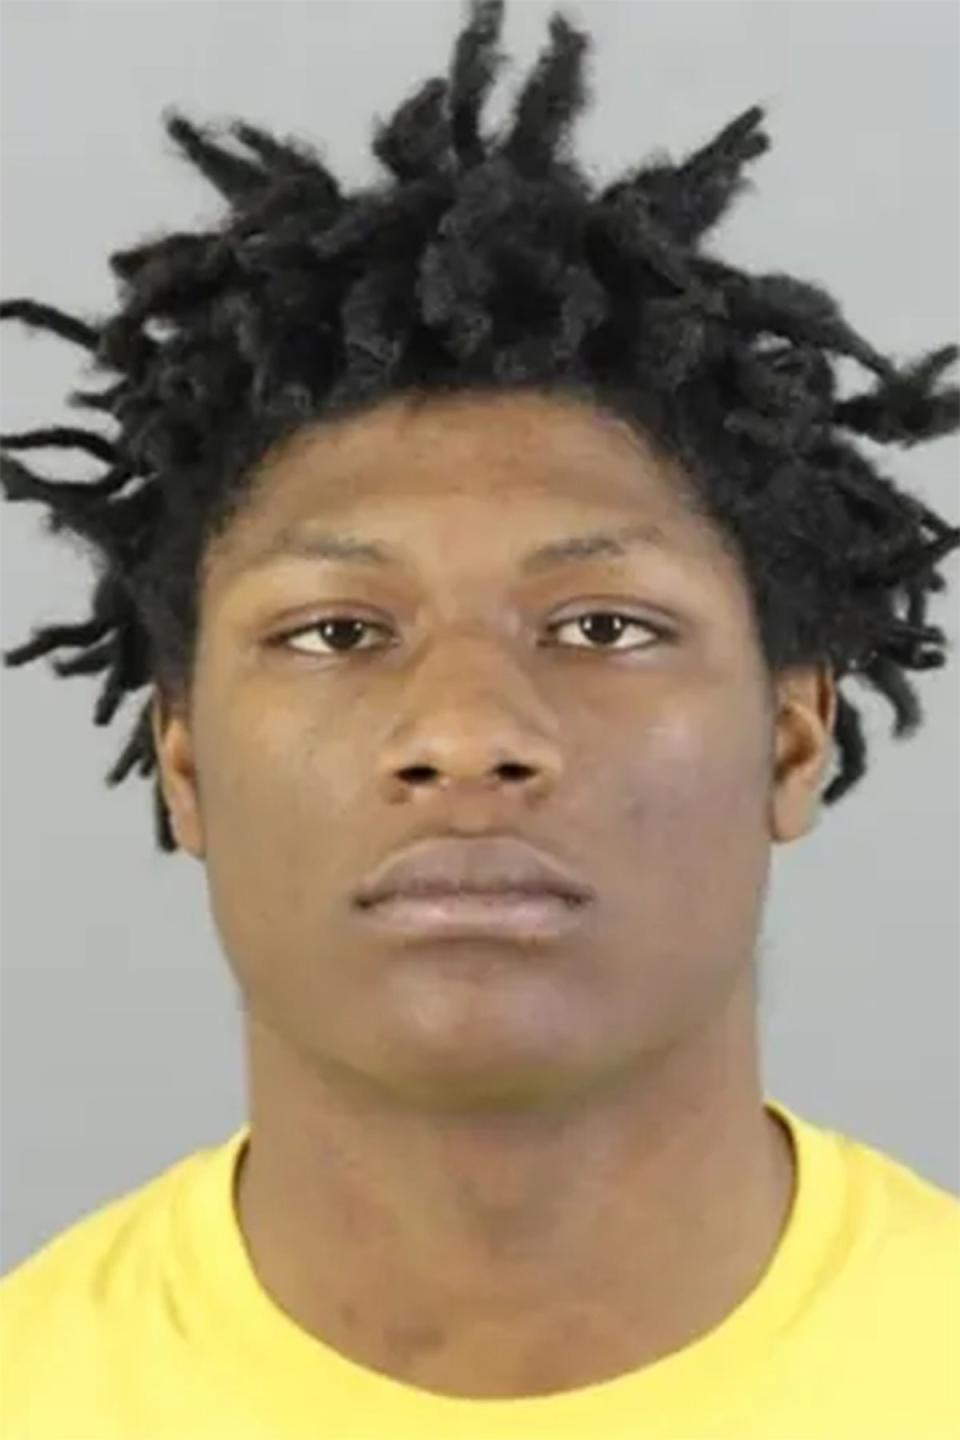 Calvin Valentine, 17, was taken into custody early on Sunday in connection with the incident (Waukesha Police Department)